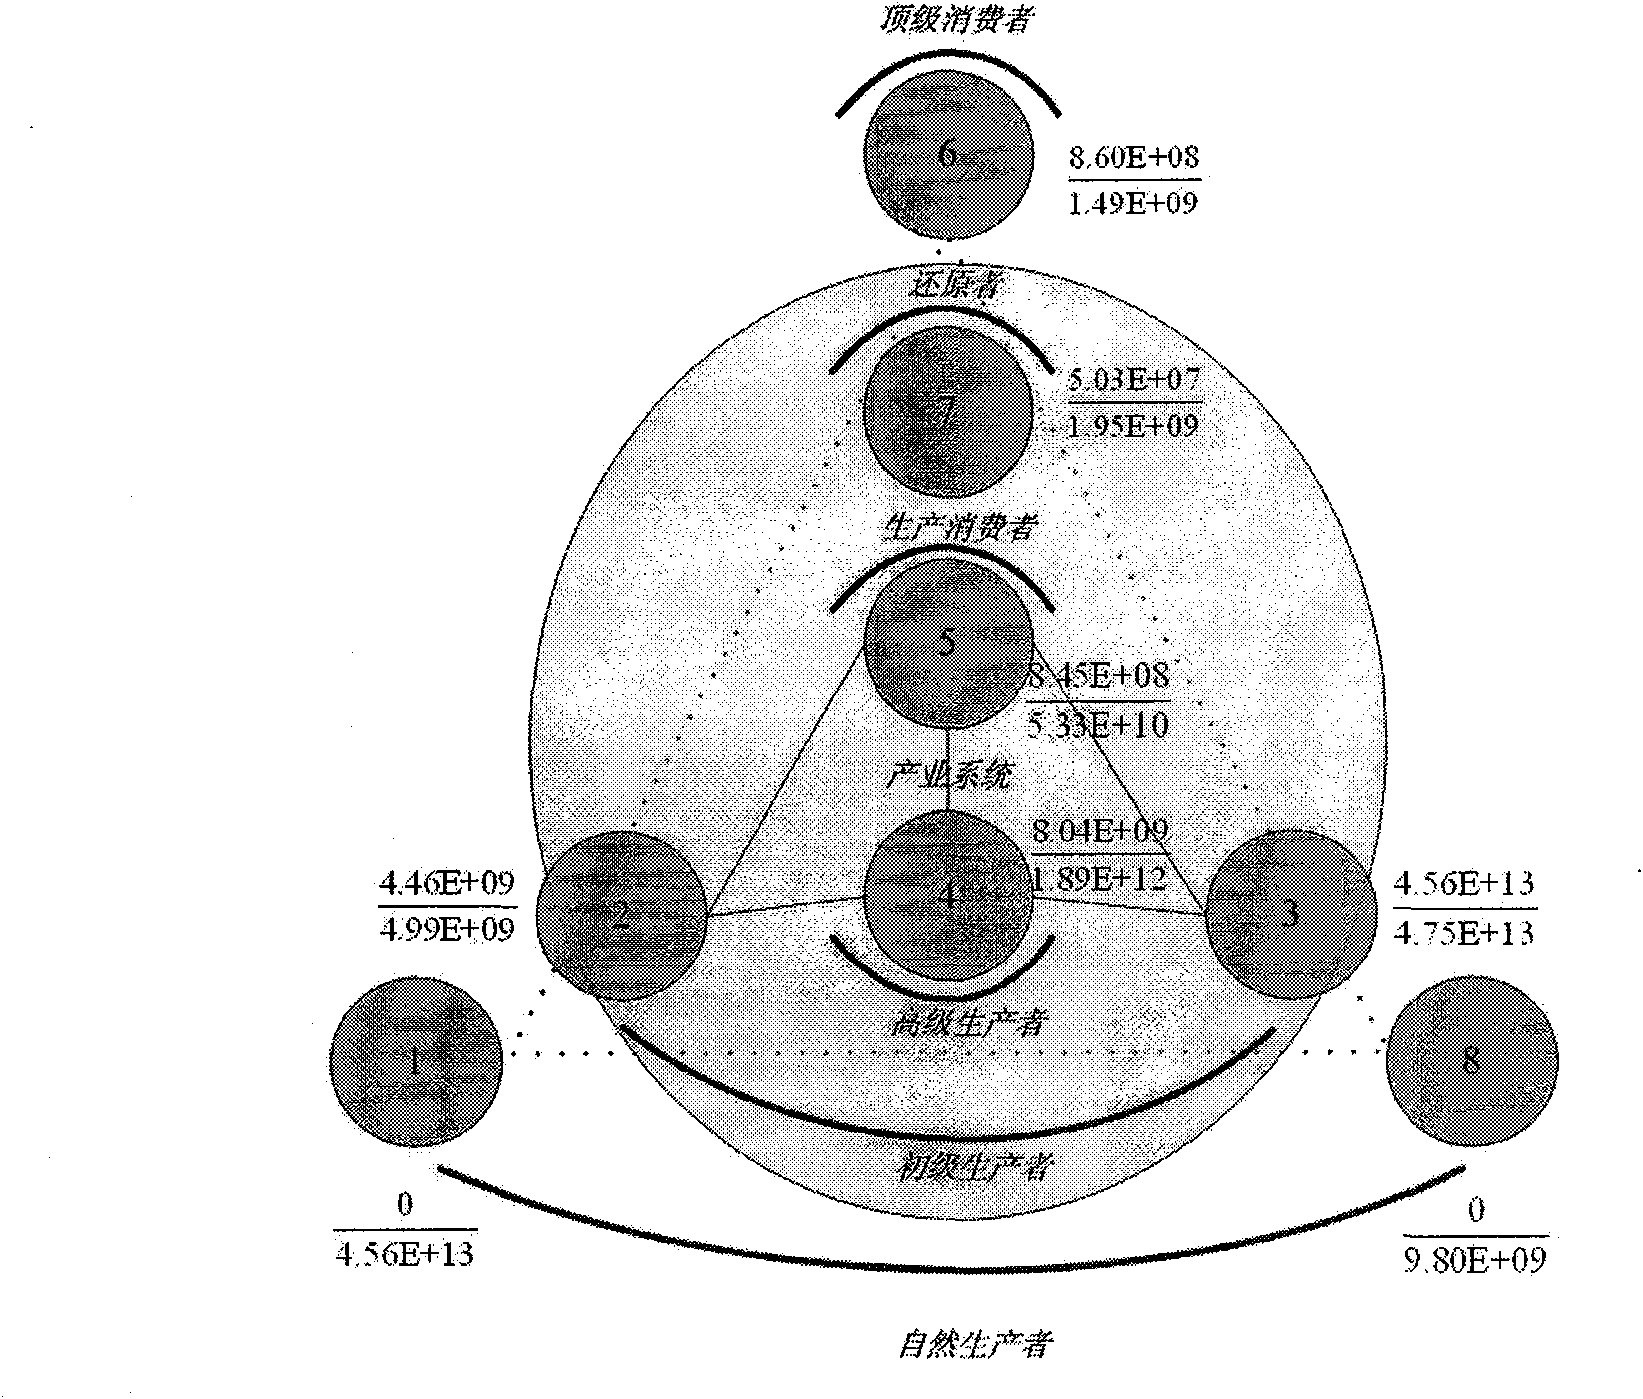 Analysis method for local area ecological network